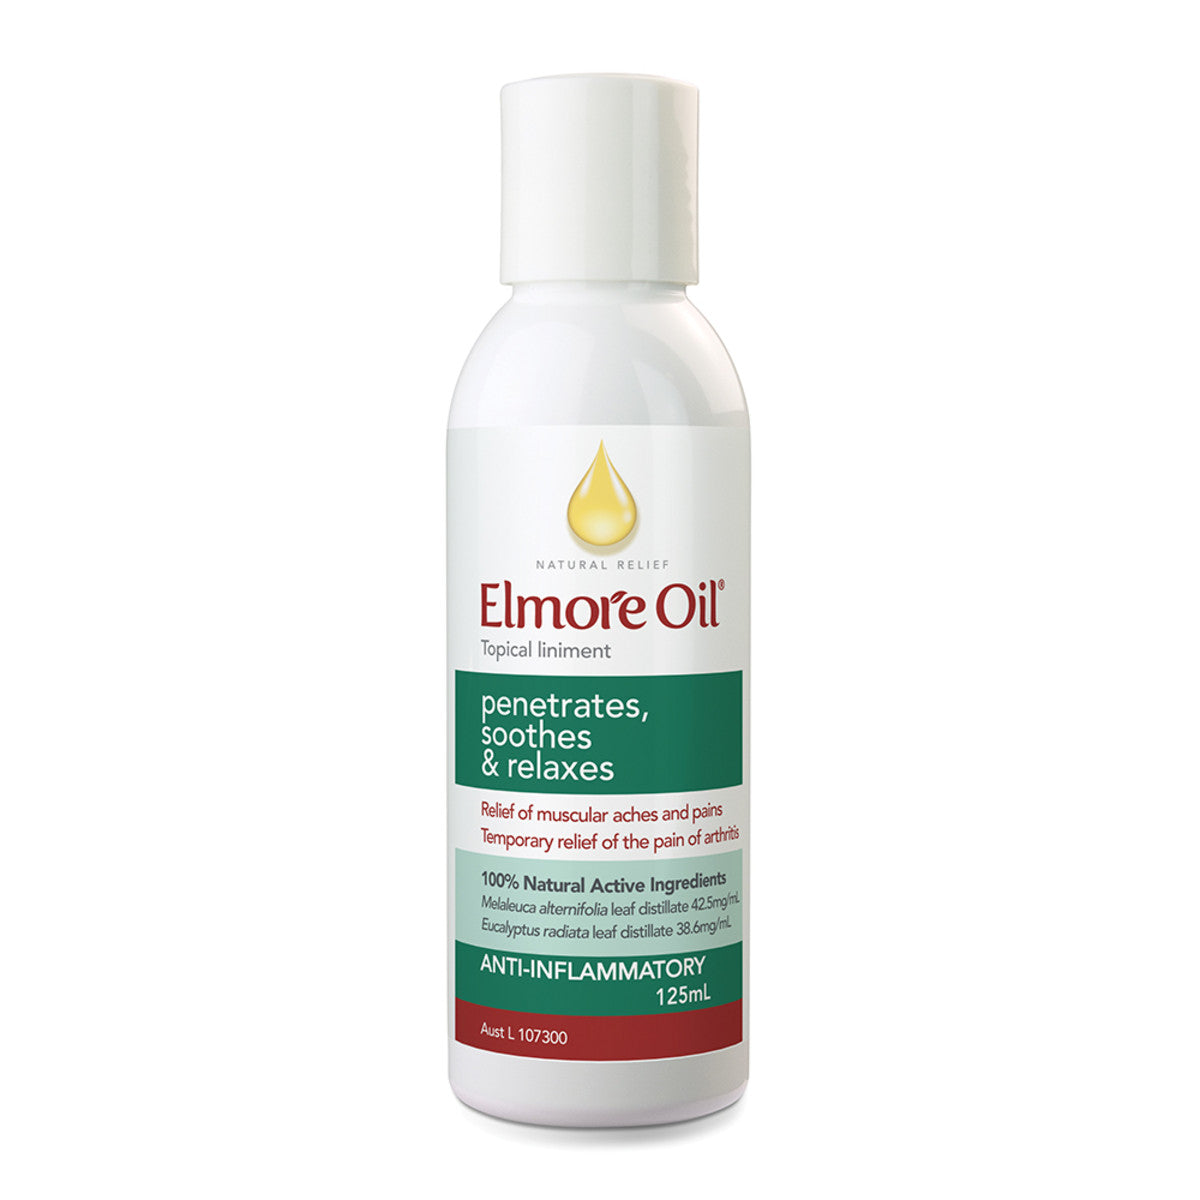 Elmore Oil - Natural Relief Topical Liniment Anti-Inflammatory